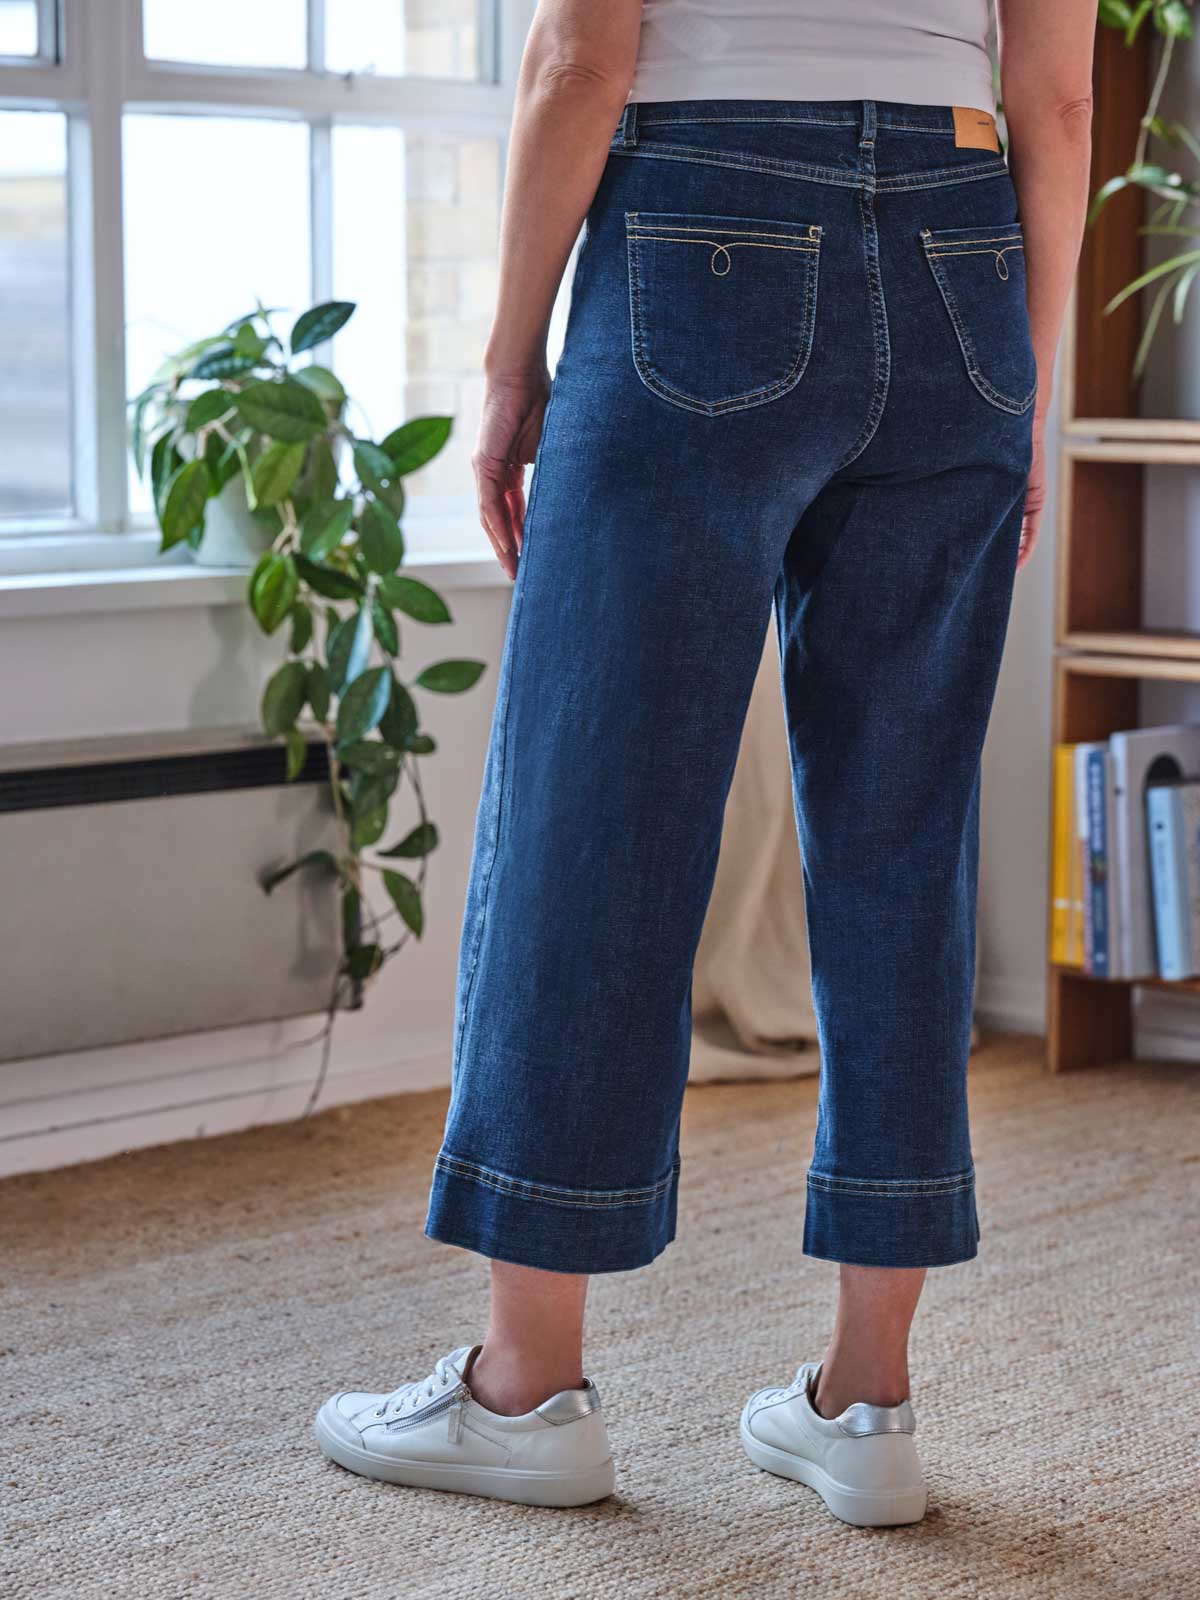 How to Wear Denim Culottes - Straight A Style